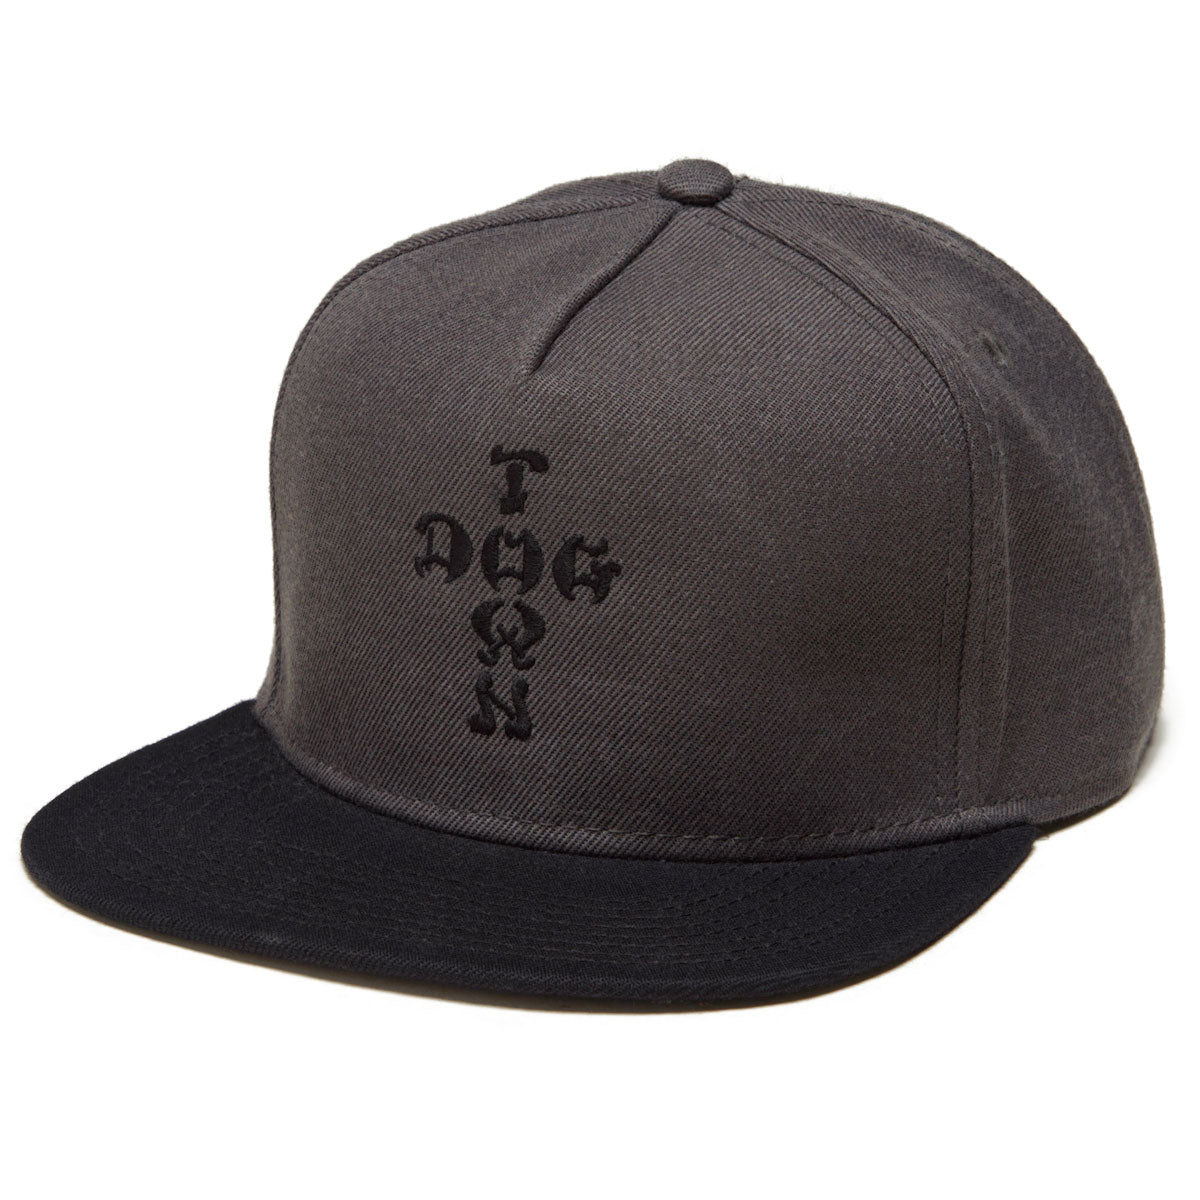 Dogtown Cross Letters Snapback Hat - Charcoal Grey/Black image 1